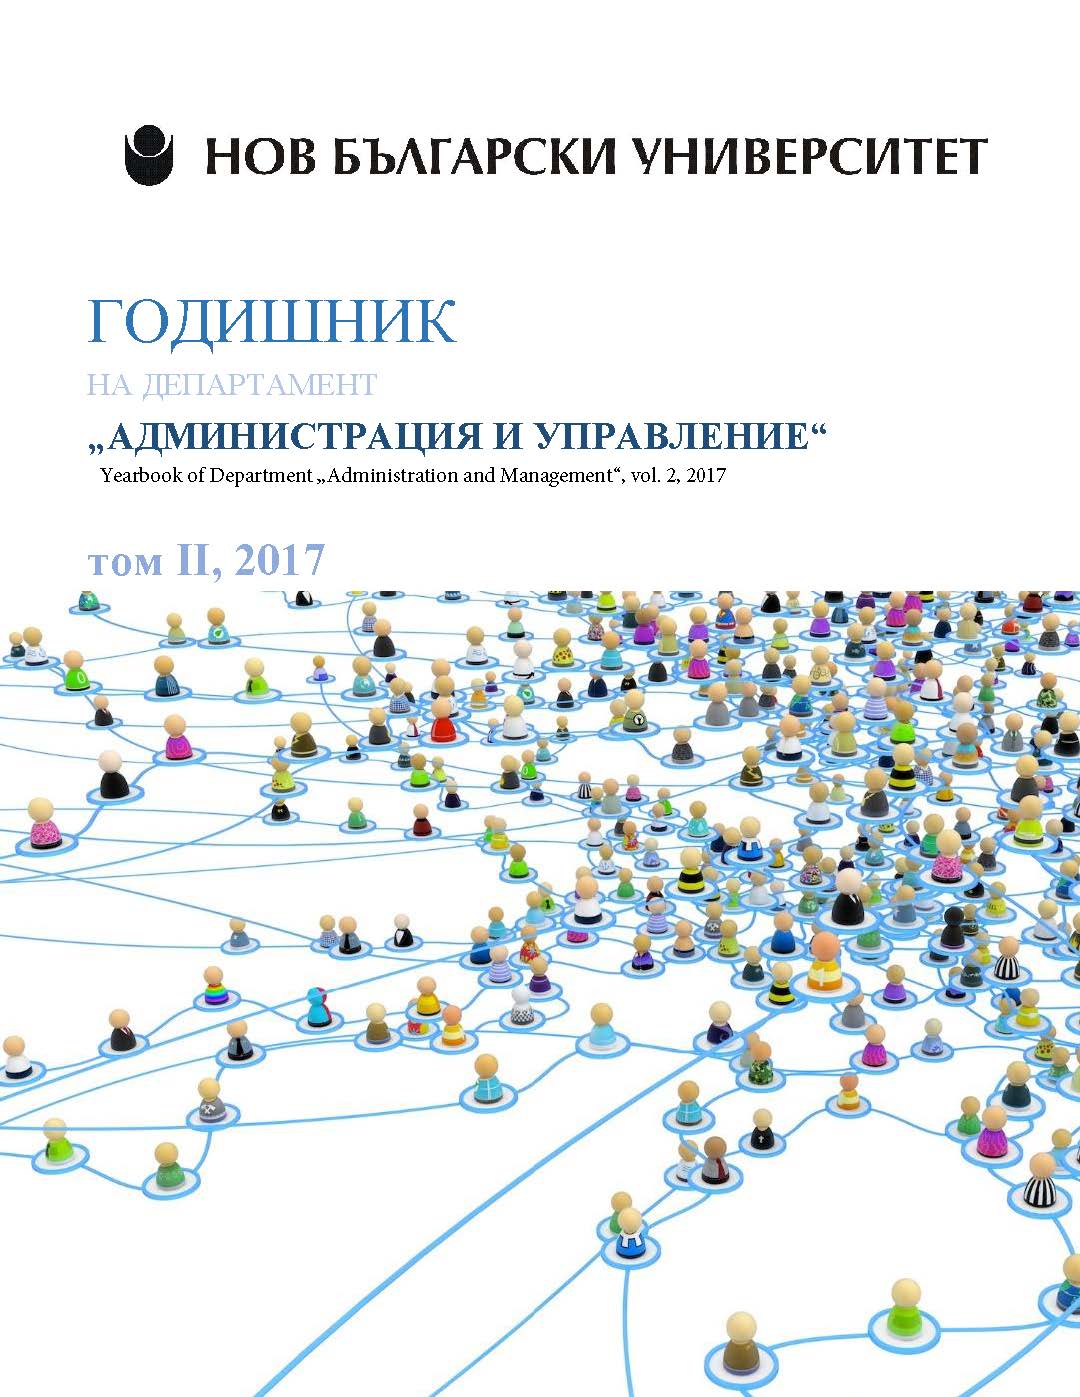 Problems of Youth Employment and Unemployment Policy in Bulgaria Cover Image